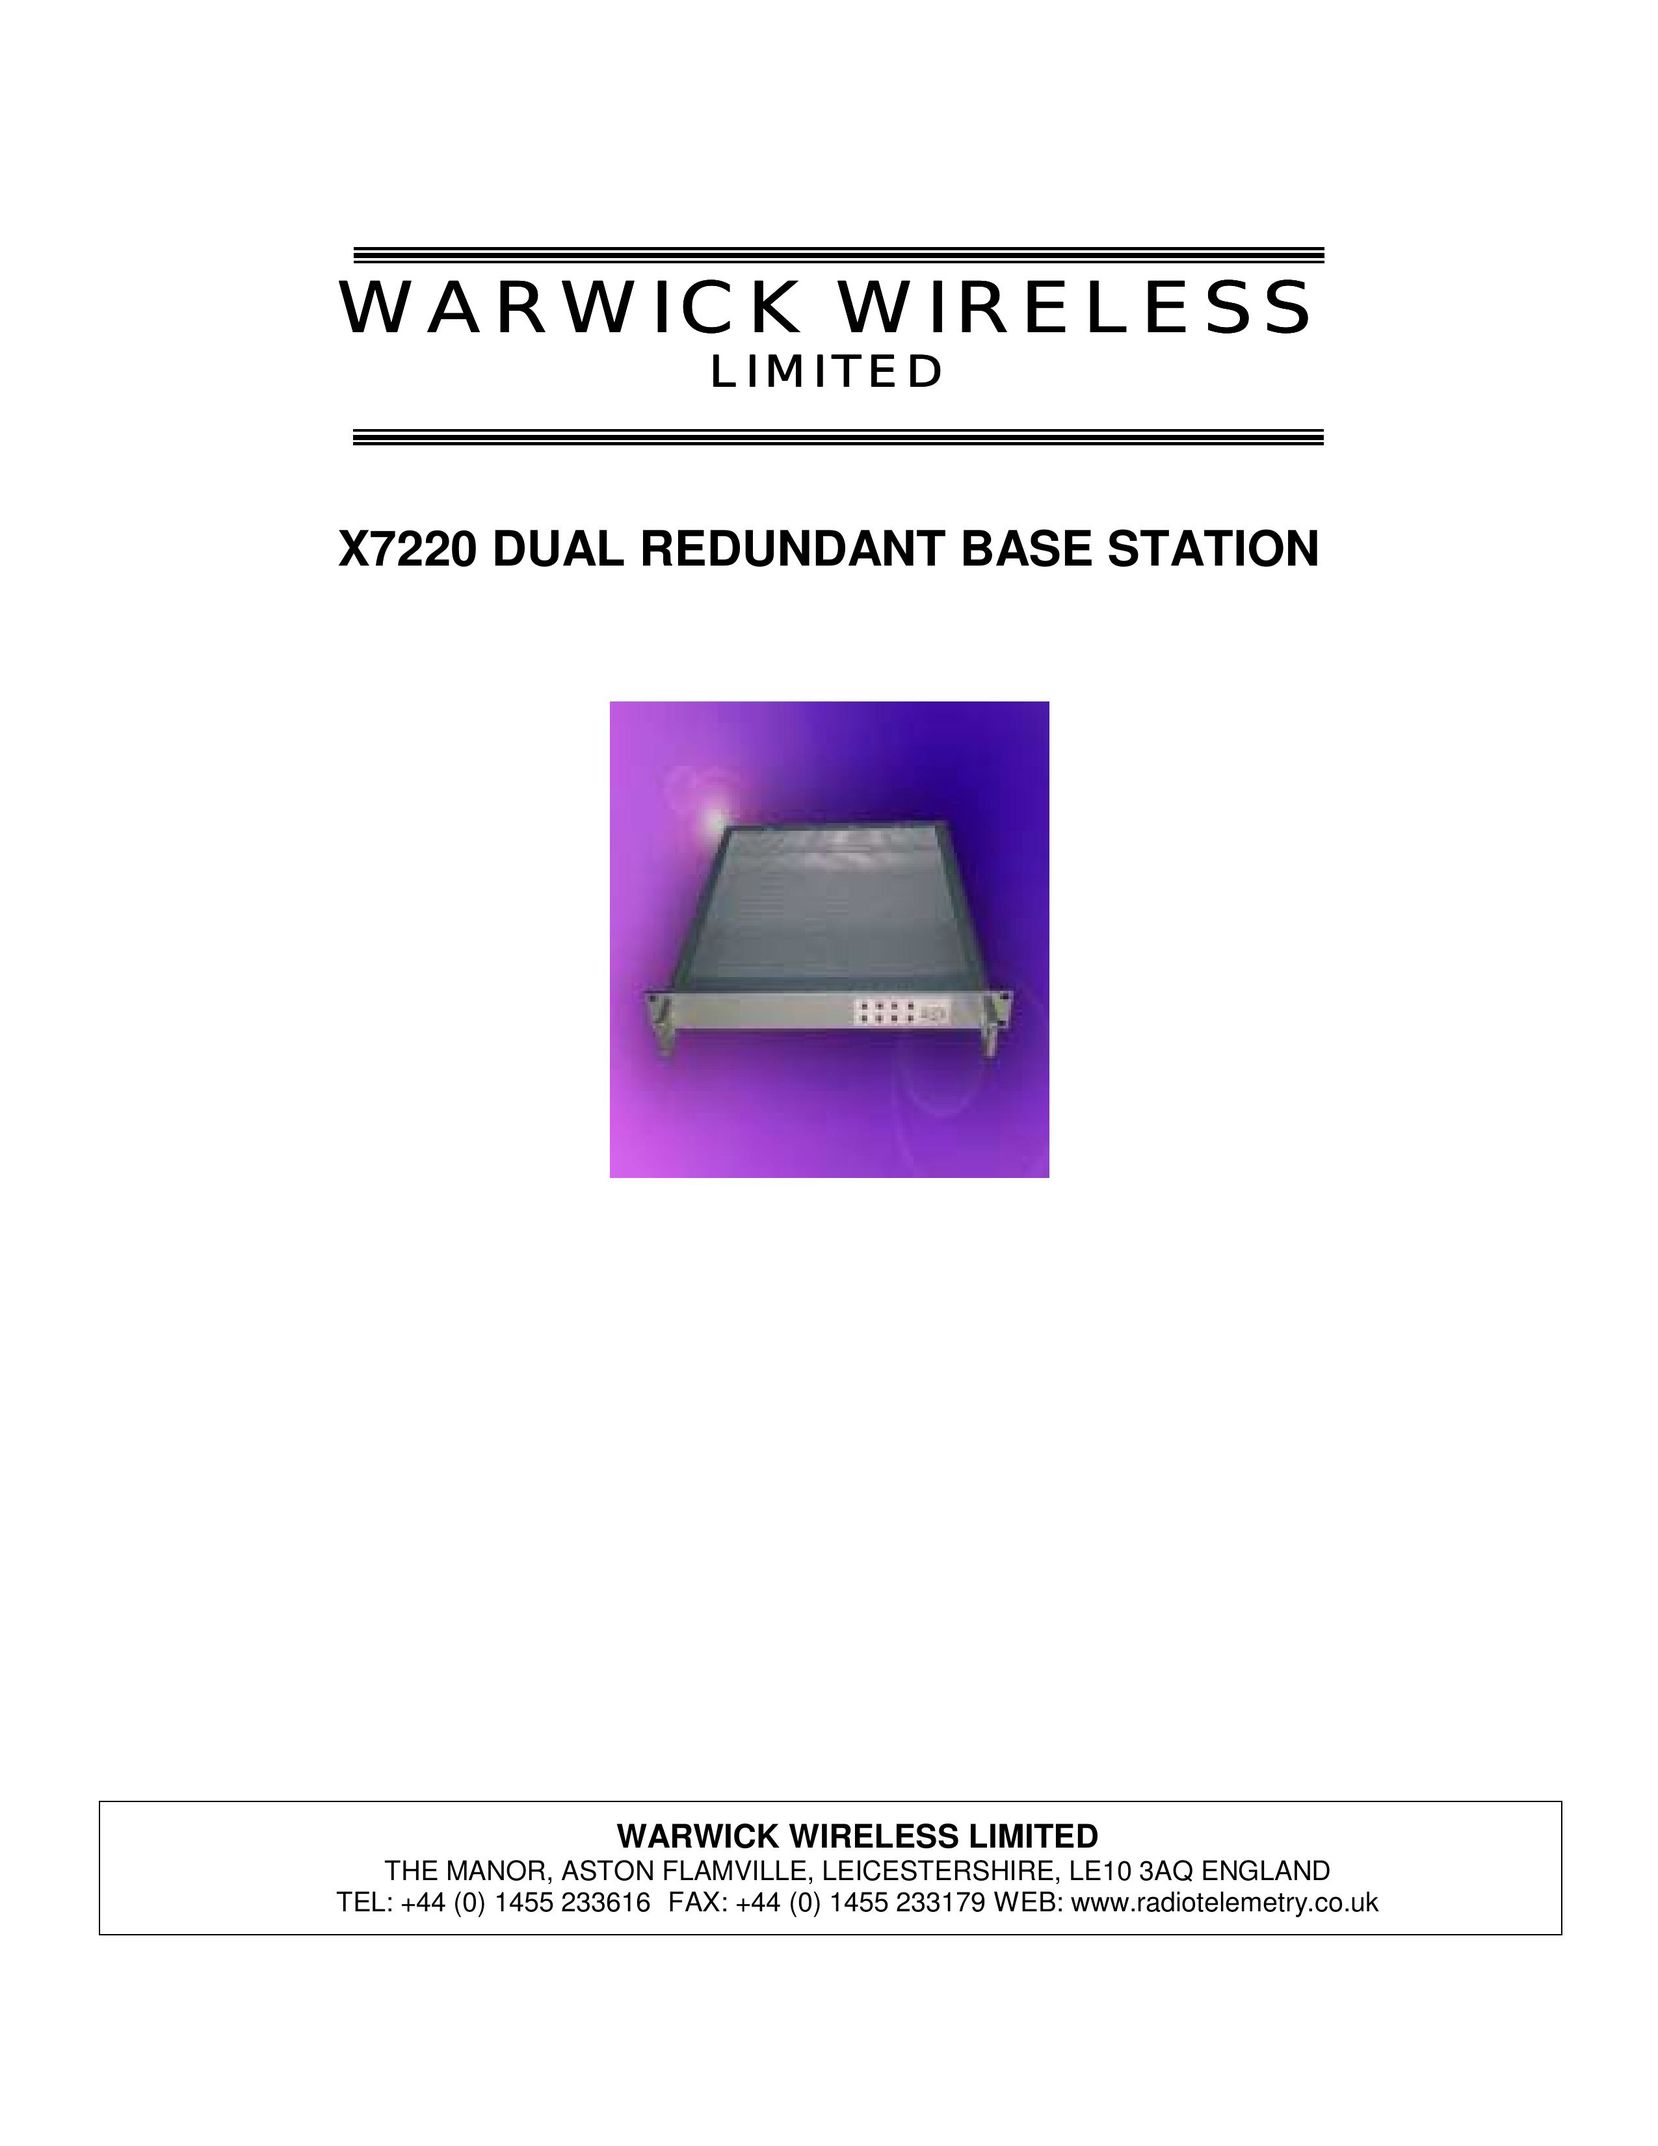 Warwick X7220 Network Router User Manual